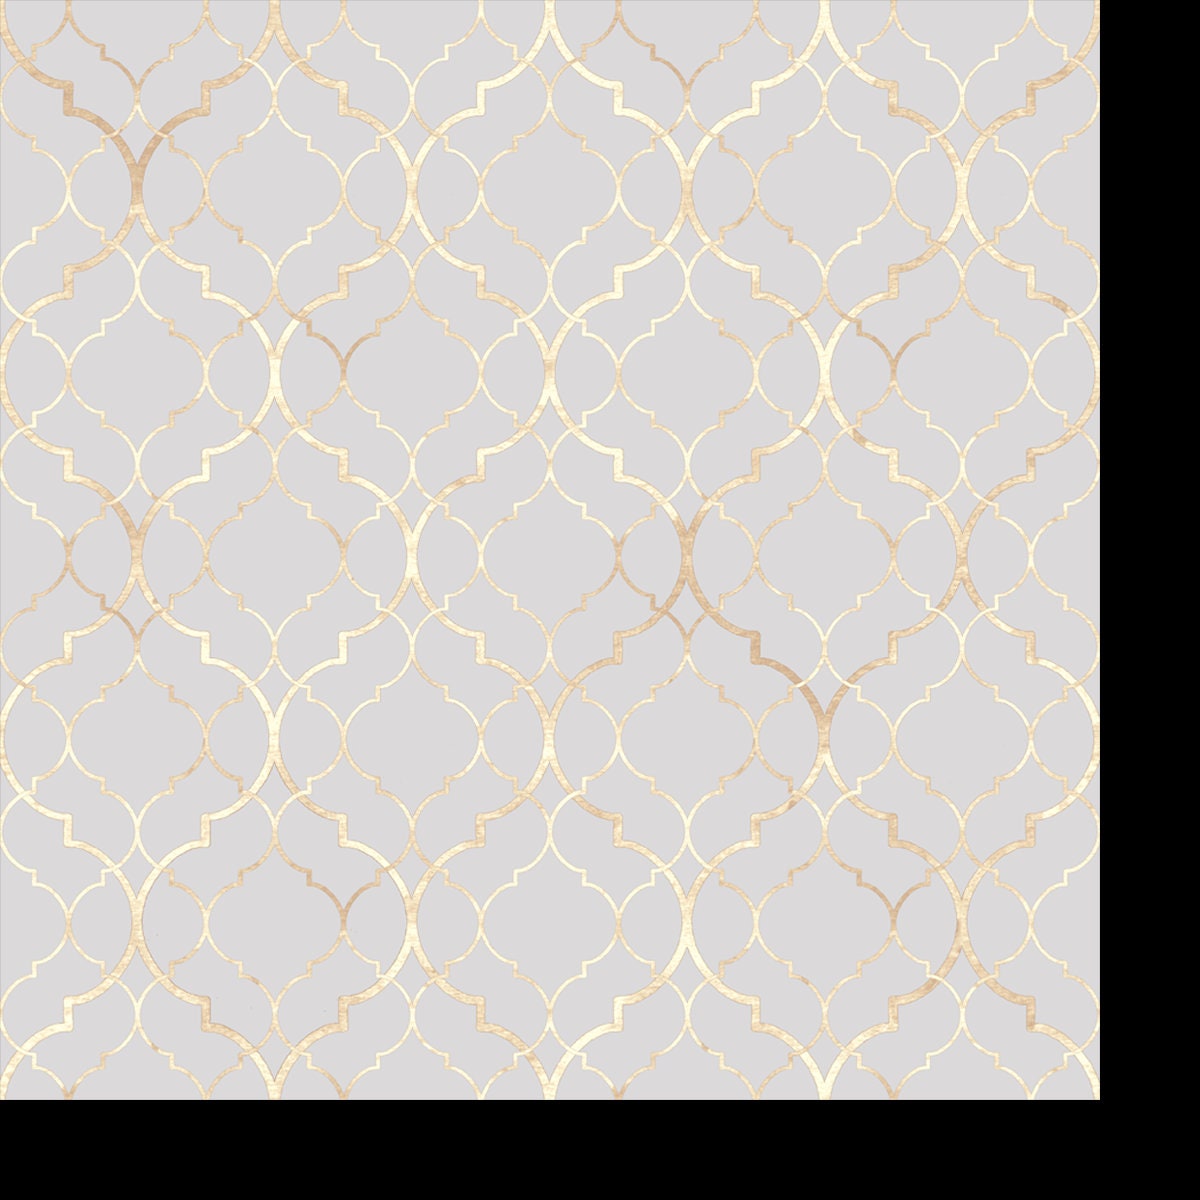 Vintage Decorative Moroccan Texture with Gold Line. Hand Drawn Light Gray Golden Background Wallpaper Bathroom Mural